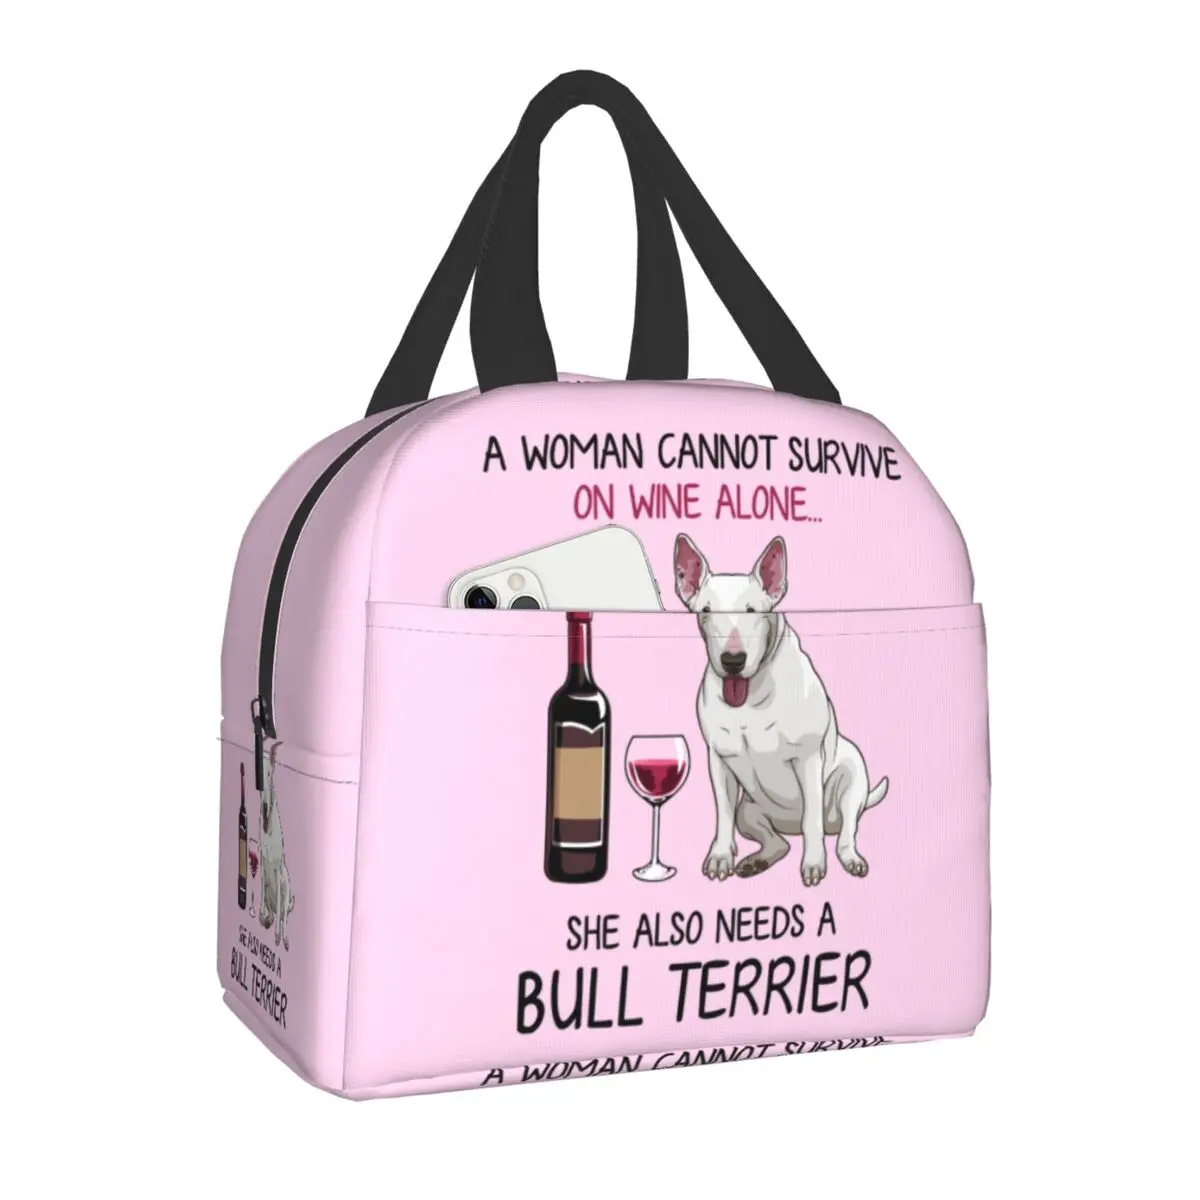 Bull Terrier And Wine Funny Dog Insulated Lunch Bag for Women Cooler Thermal Lunch Box Camping Travel Tote Picnic Storage Bag